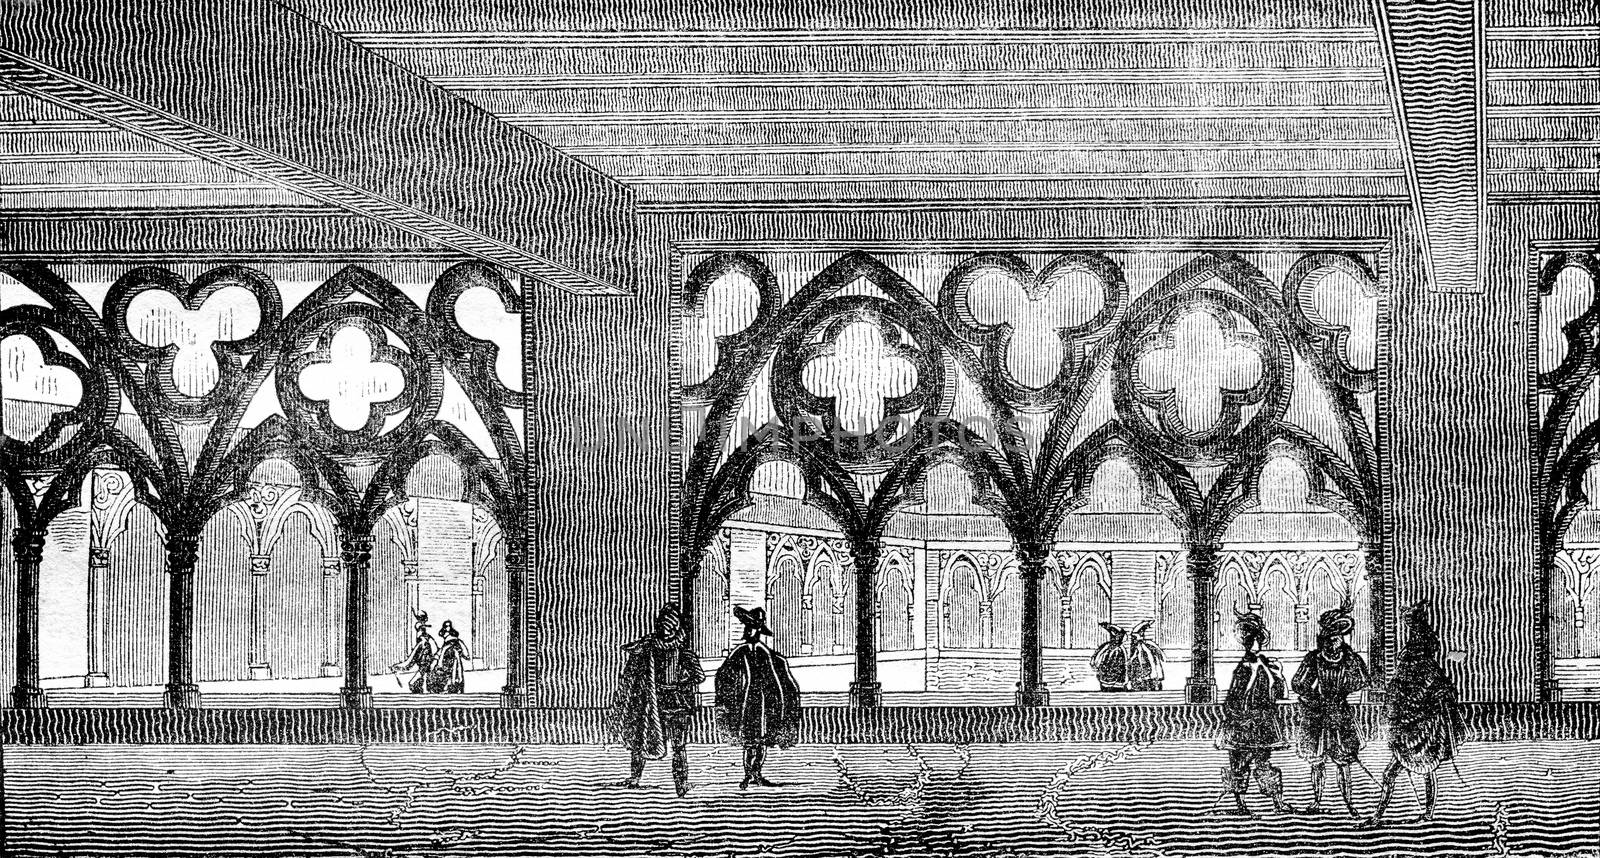 View of the cloister of the former college of Cluny Sorbonne square, vintage engraved illustration. Magasin Pittoresque 1836.
